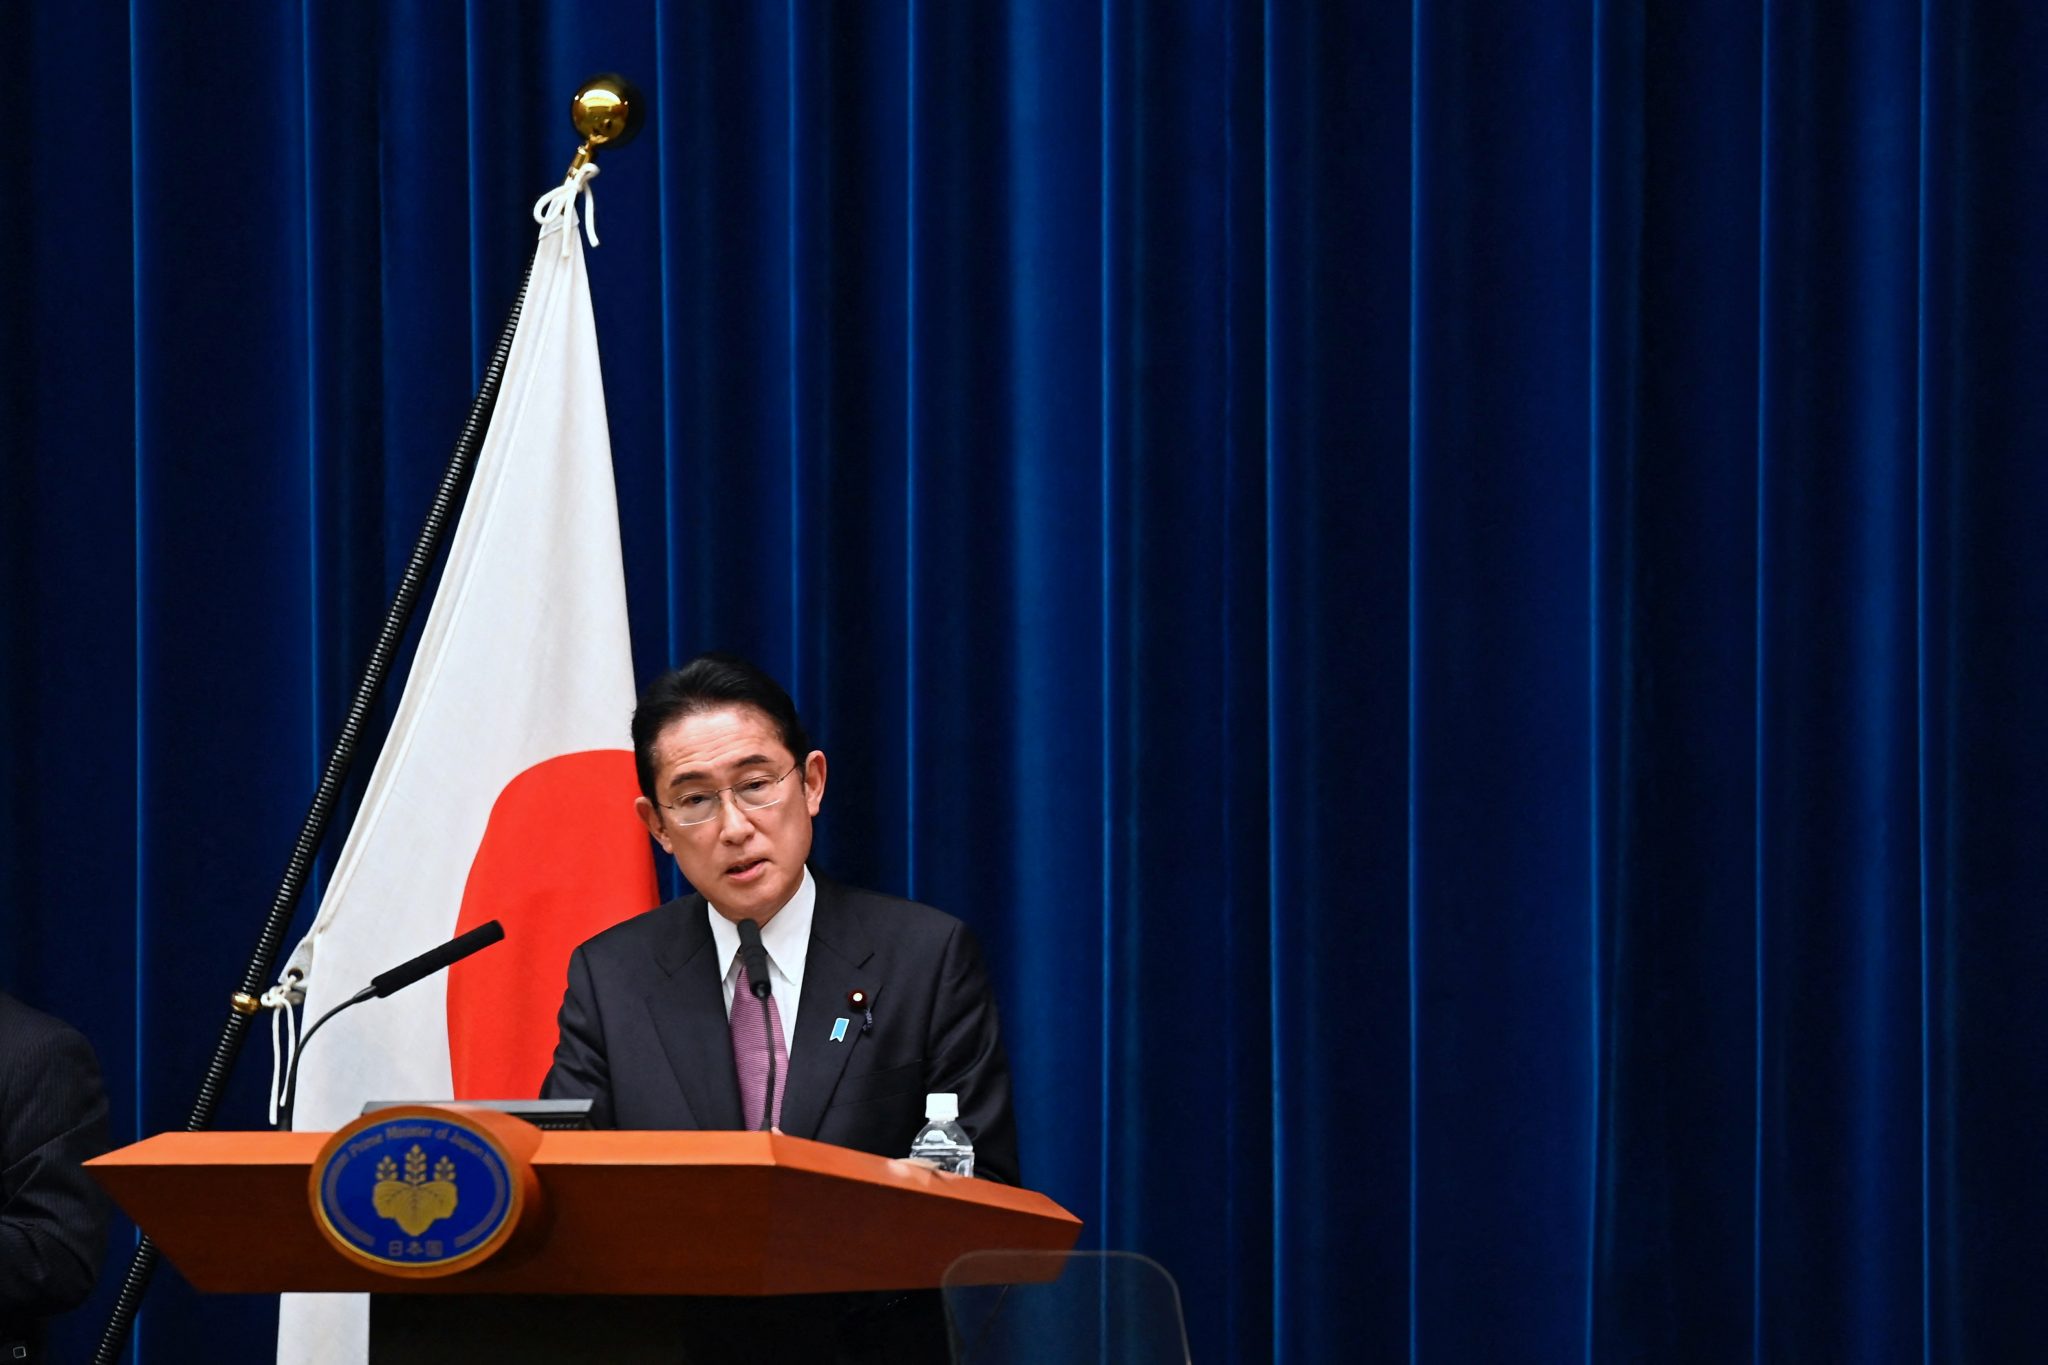 National News: Lack of security for Japanese prime minister